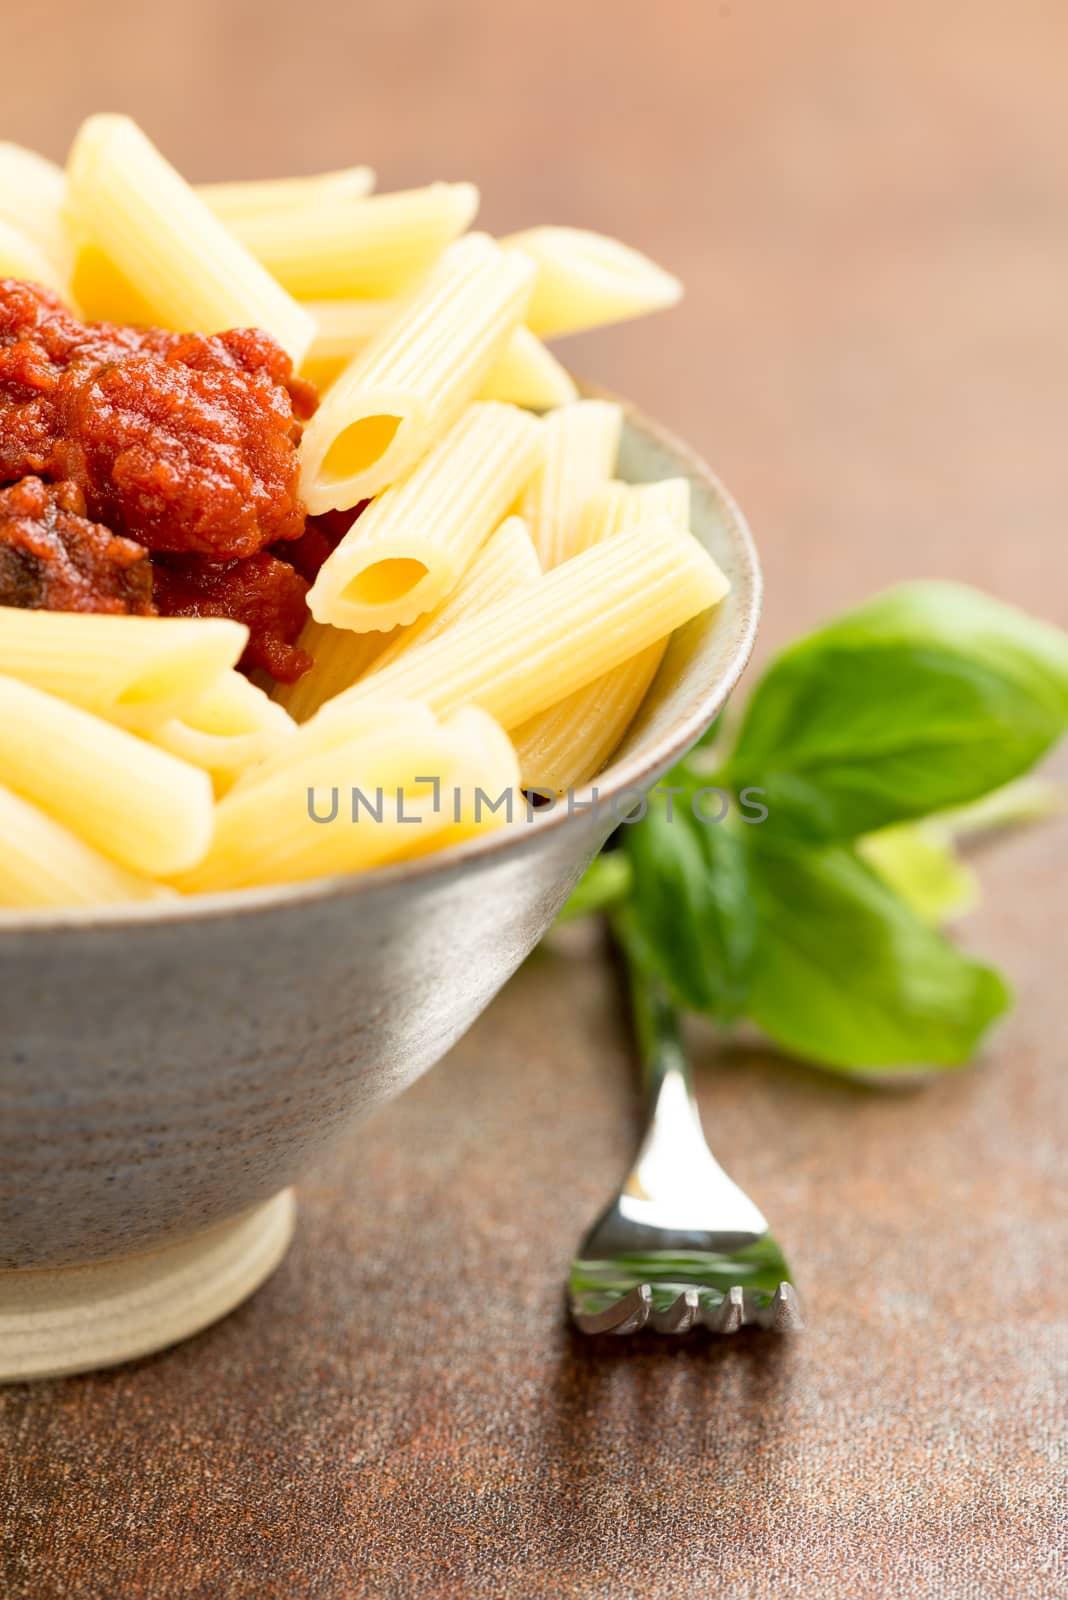 Penne pasta with a tomato bolognese beef sauce by Nanisimova